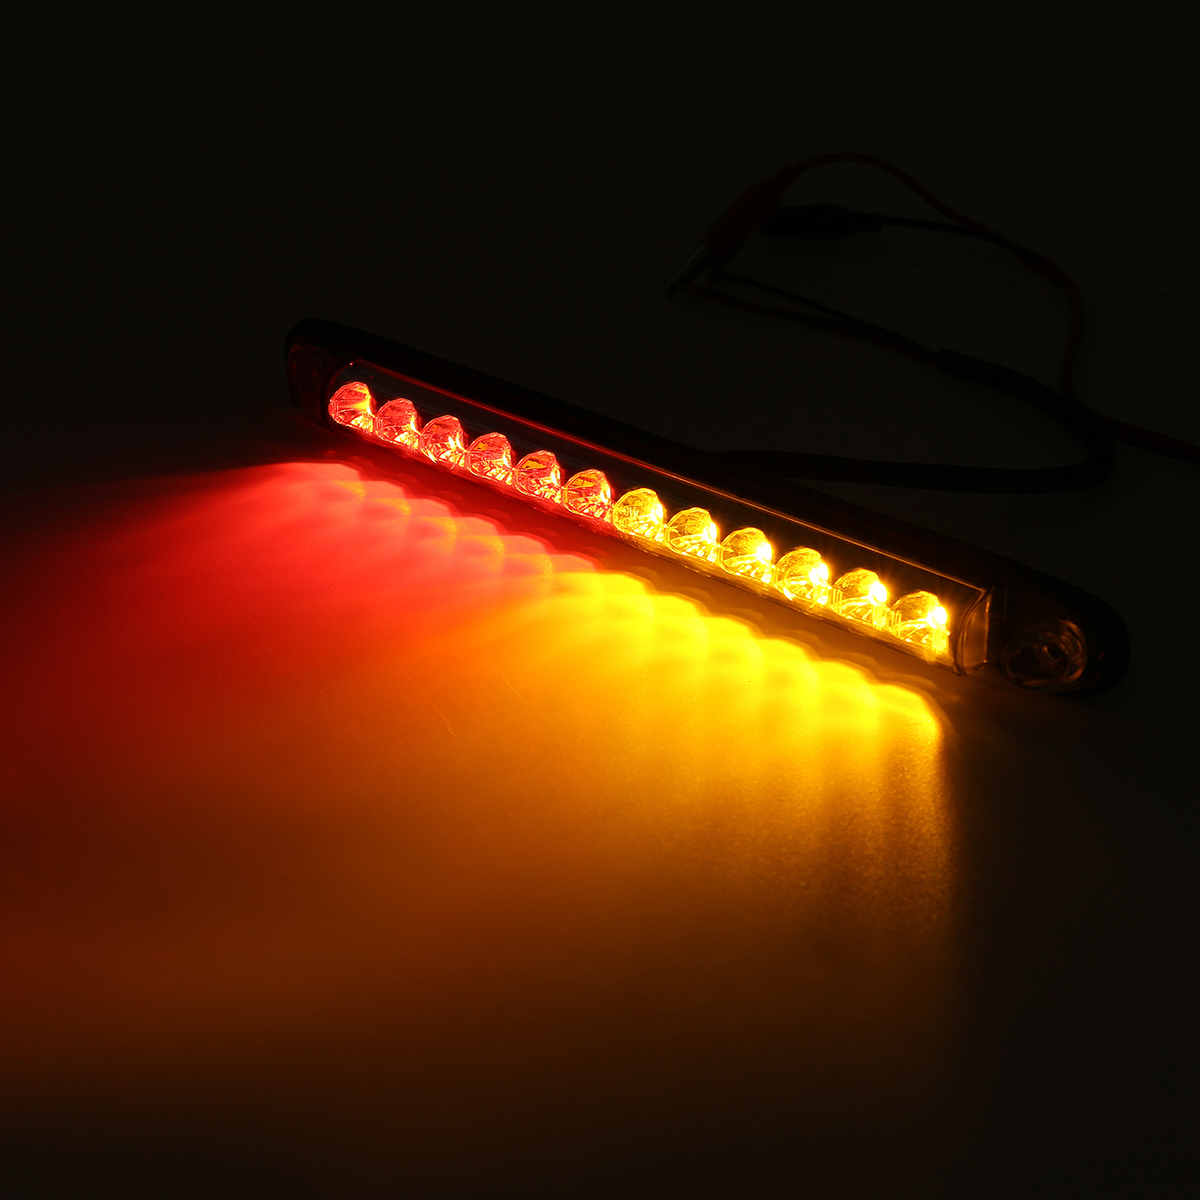 10-30V LED Trailer Light Rear Turn Brake Light Bar Red Yellow Dual Color Waterpoof IP68 for Car Truck RV - Auto GoShop